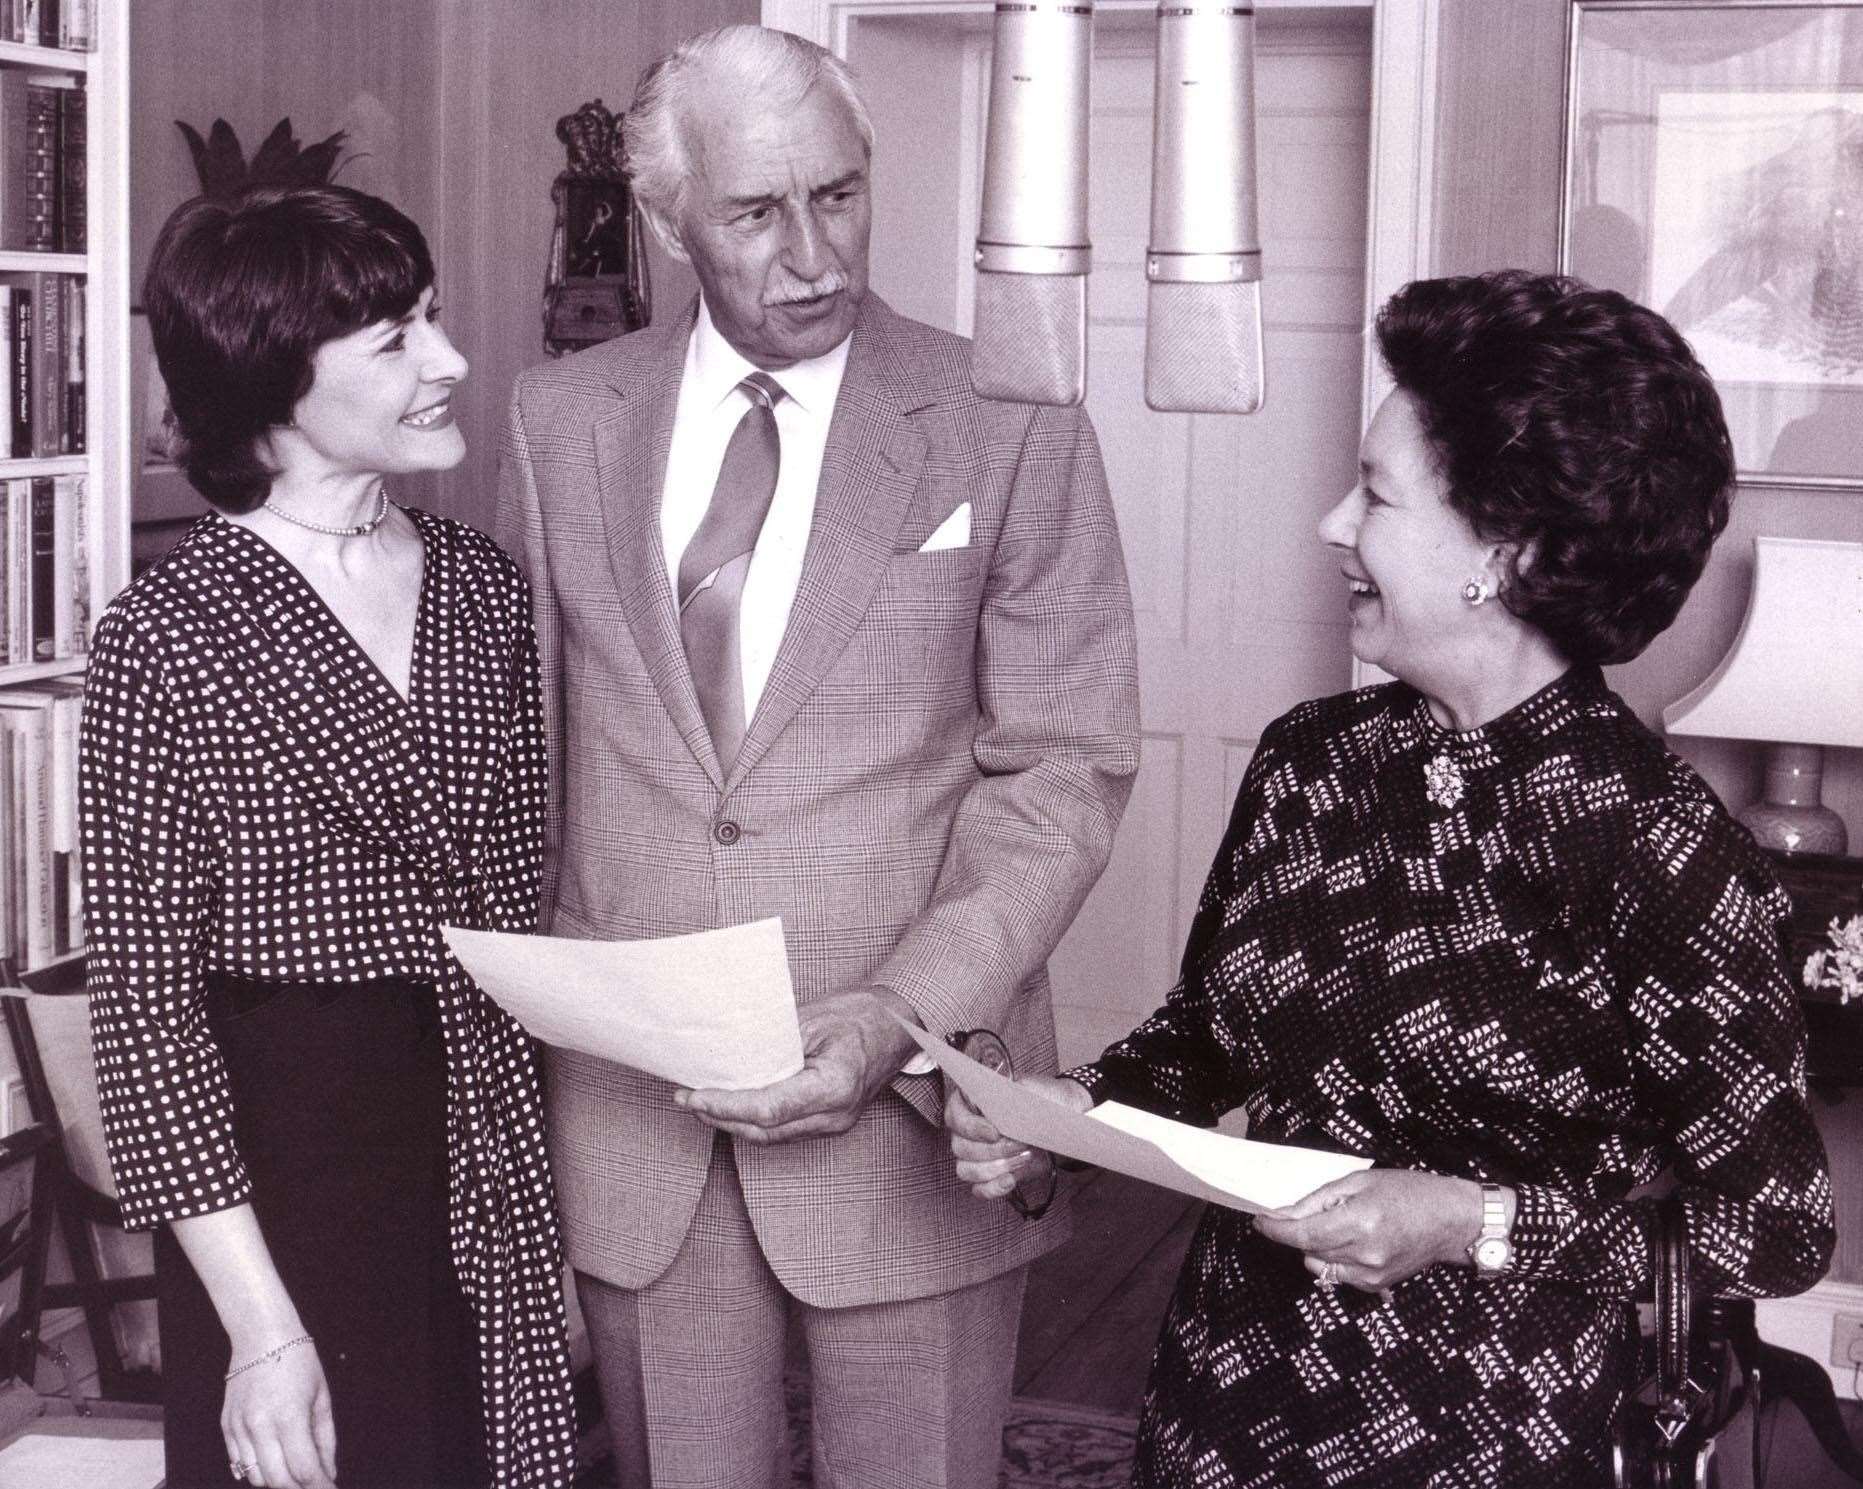 The Archers cast members Sara Coward and Arnold Peters with Princess Margaret during the recording of a special episode of The Archers in 1984 (PA)